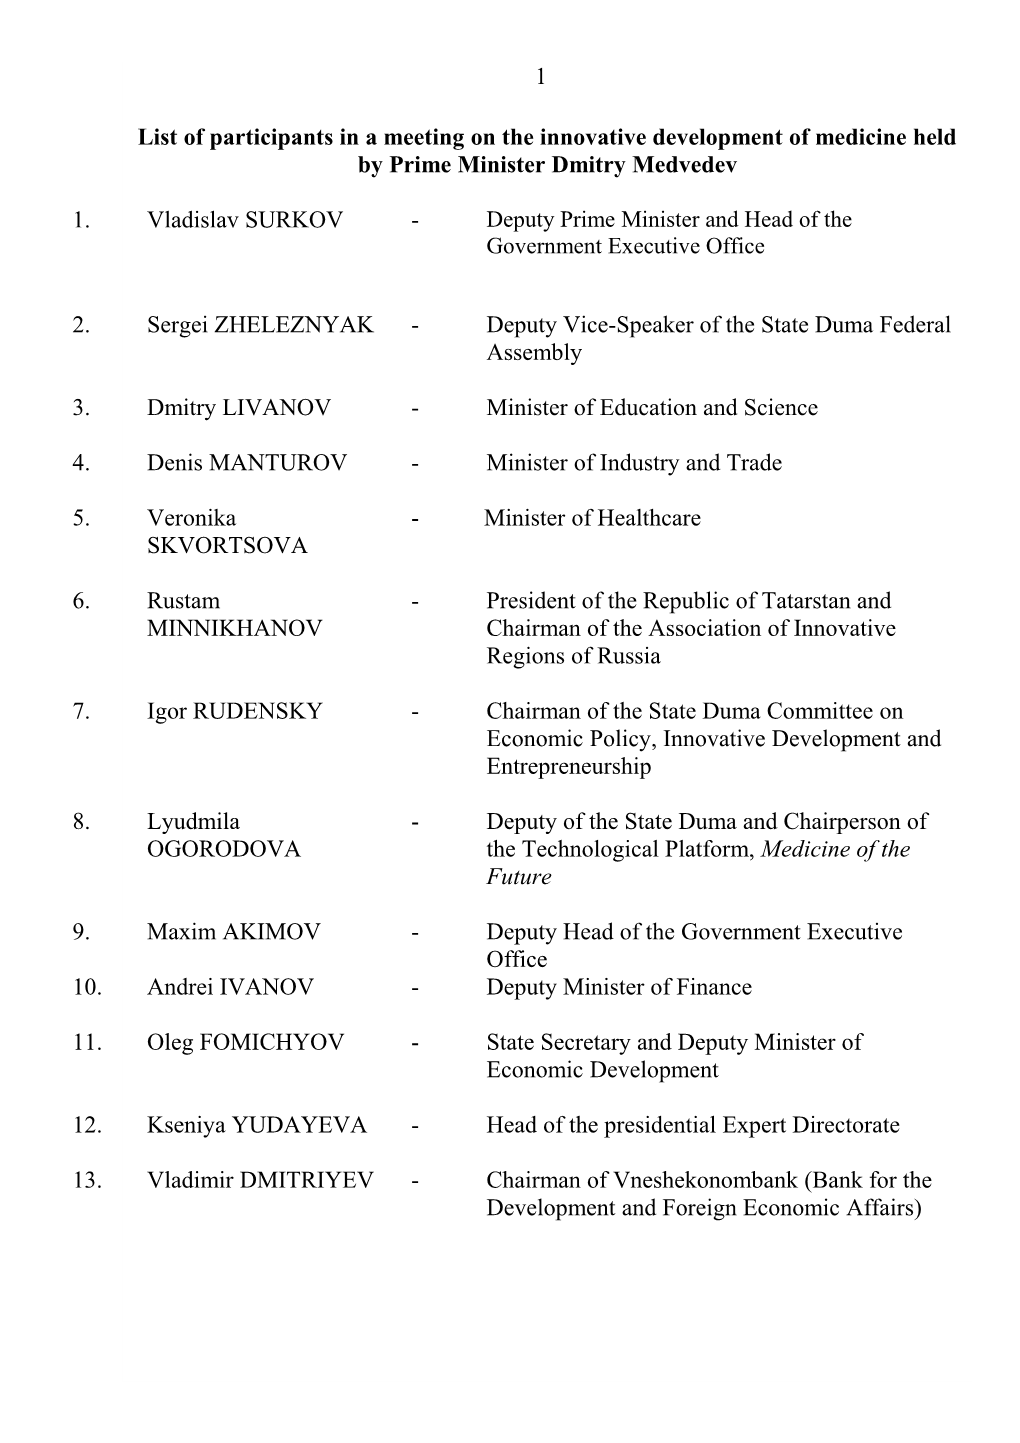 List of Participantsin a Meeting on the Innovative Development of Medicine Held by Prime